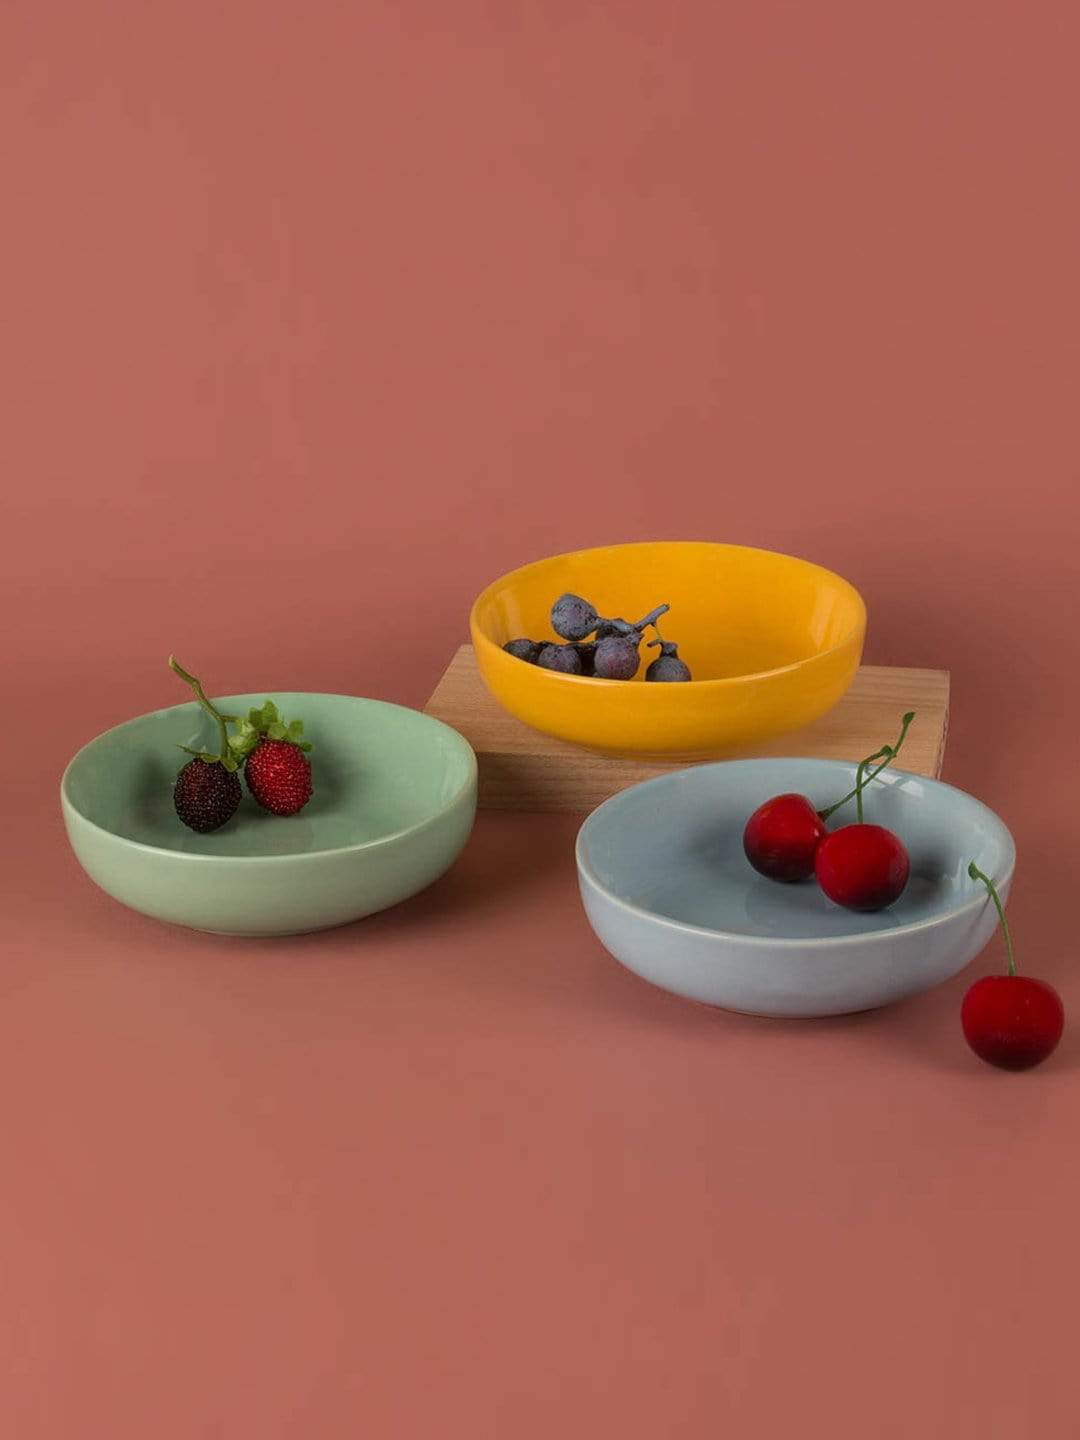 Dip BowlMaterial: Handmade Glazed Stoneware
Dimensions: 11 Dia x 3 H CM

Handle with care. May Chip or Break on Impact. Microwave, Dishwasher and Food Safe.

 Dip BowlThe Wishing Chair